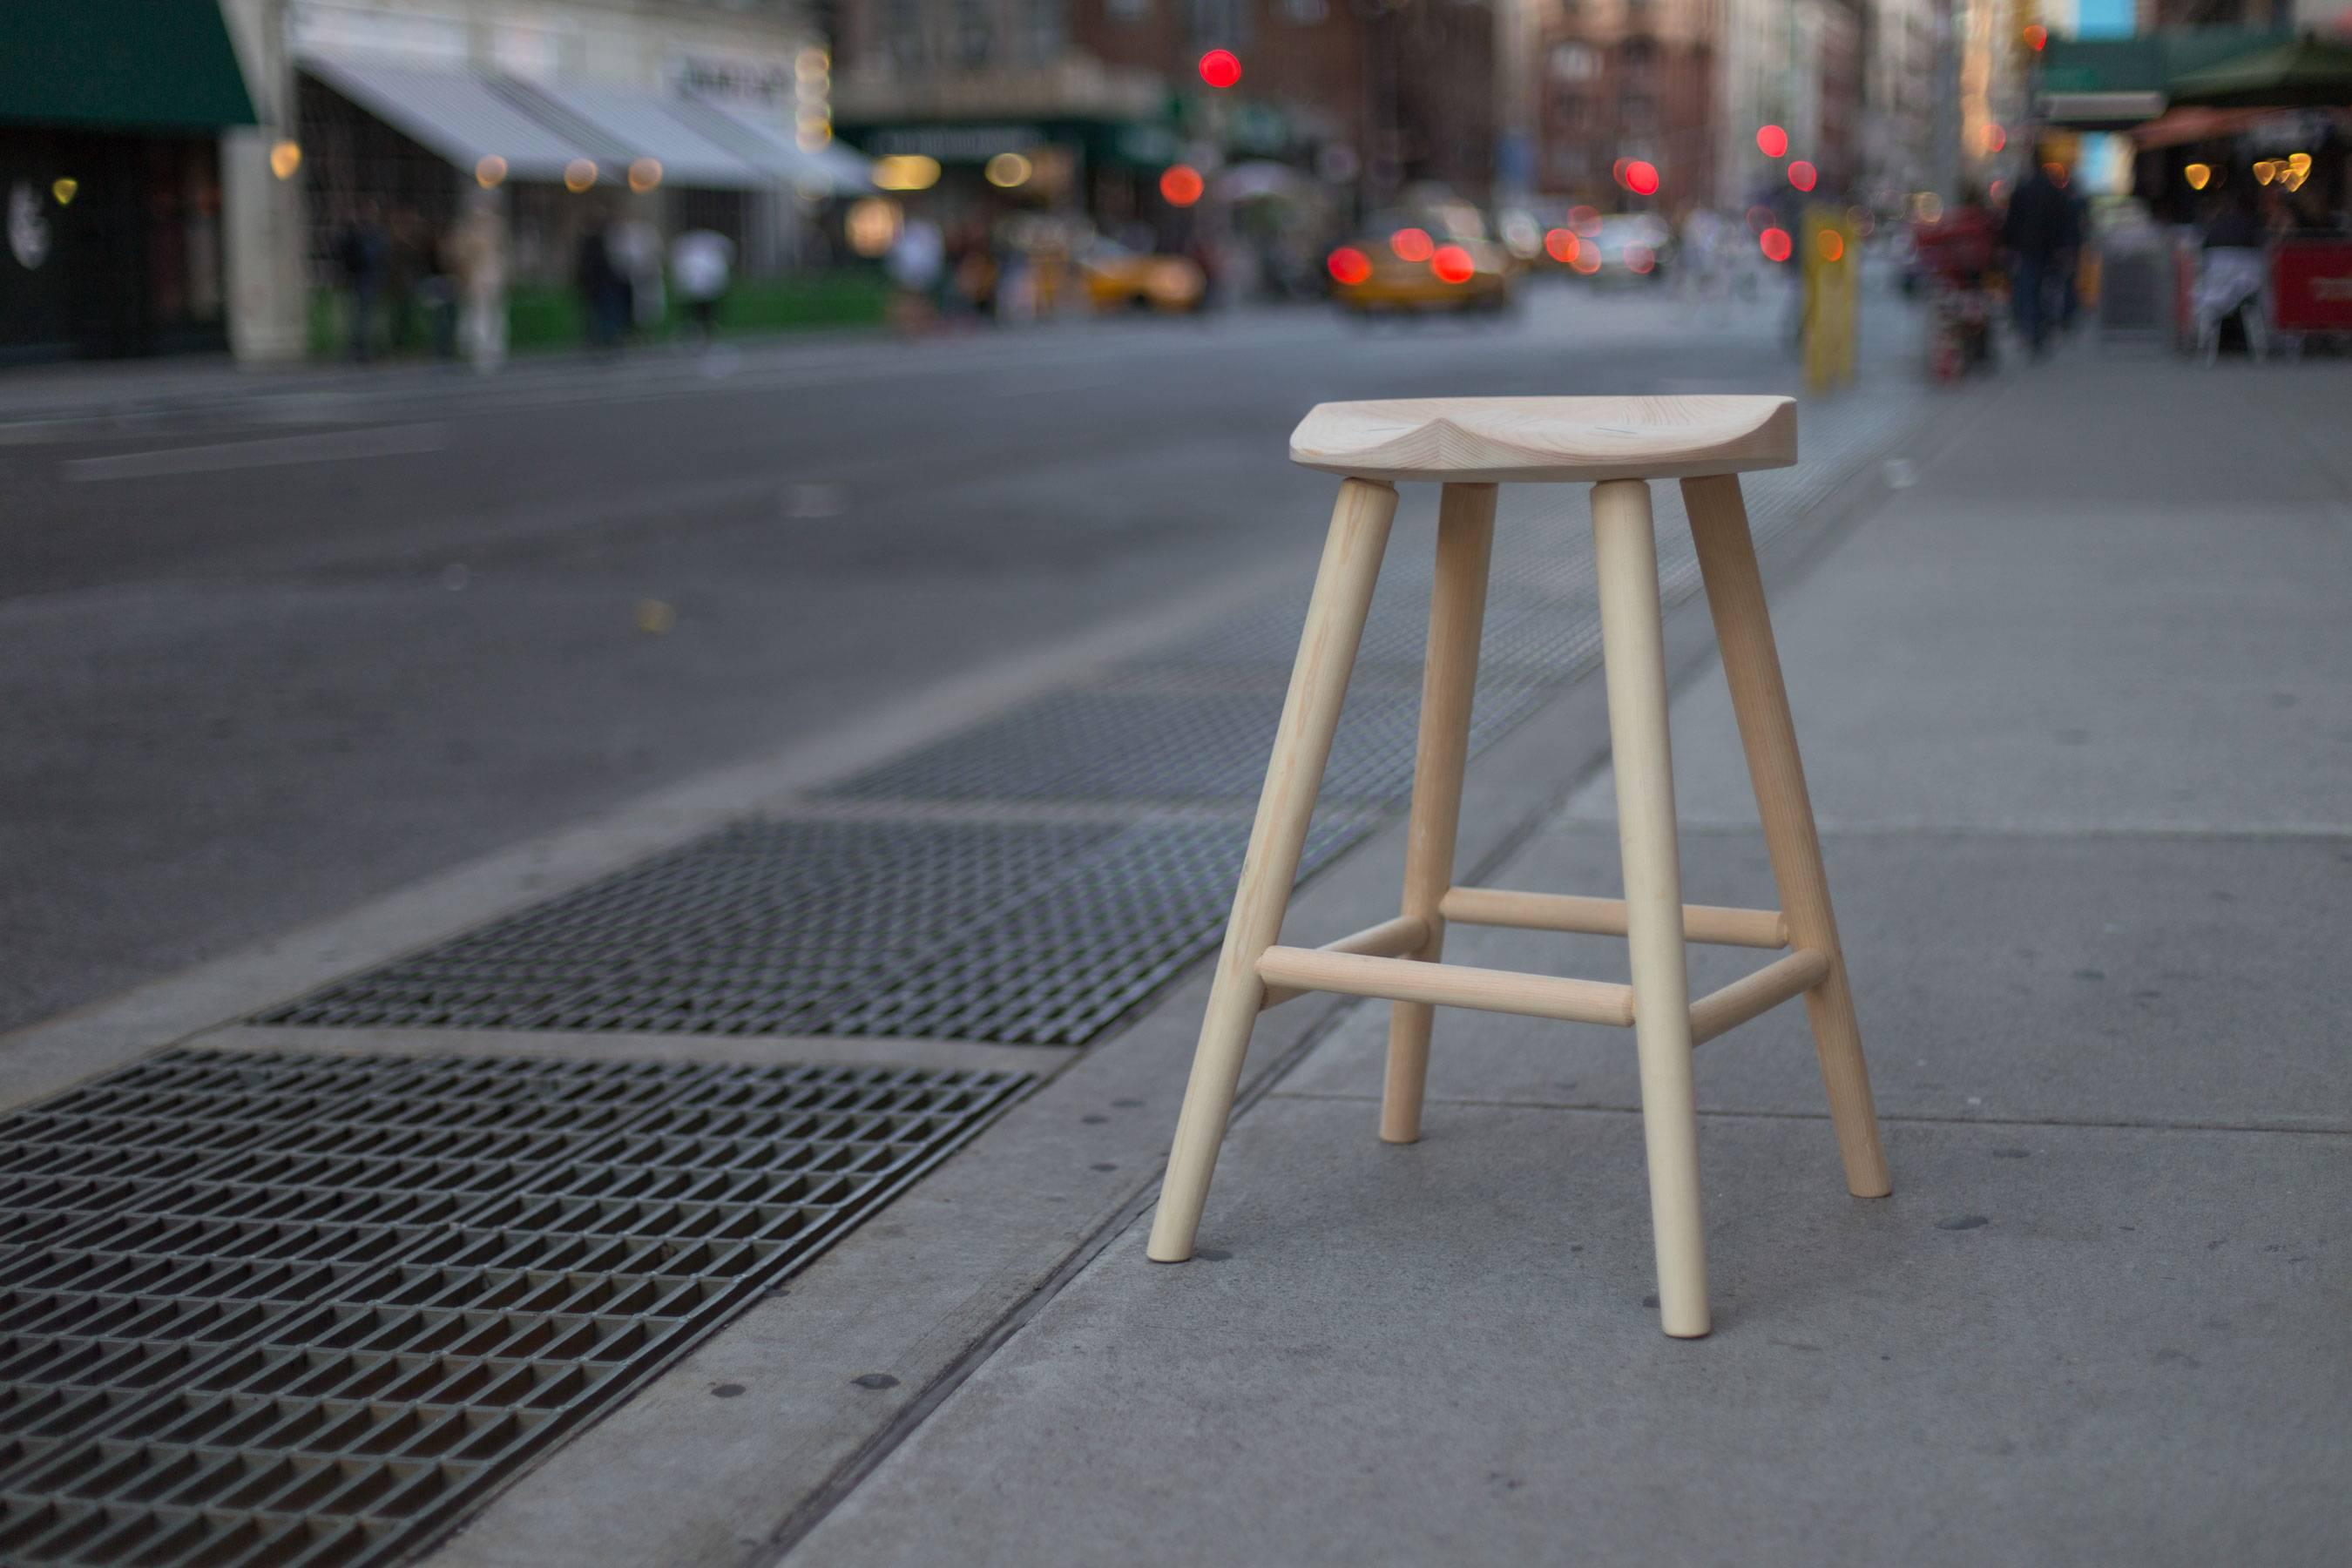 This simple barstool is quite comfortable, and the hand-carved seat keeps you in place for saddling up to the bar for the long haul. Shown in natural maple, but other options including lacquered colors, walnut and other hardwoods are also available.